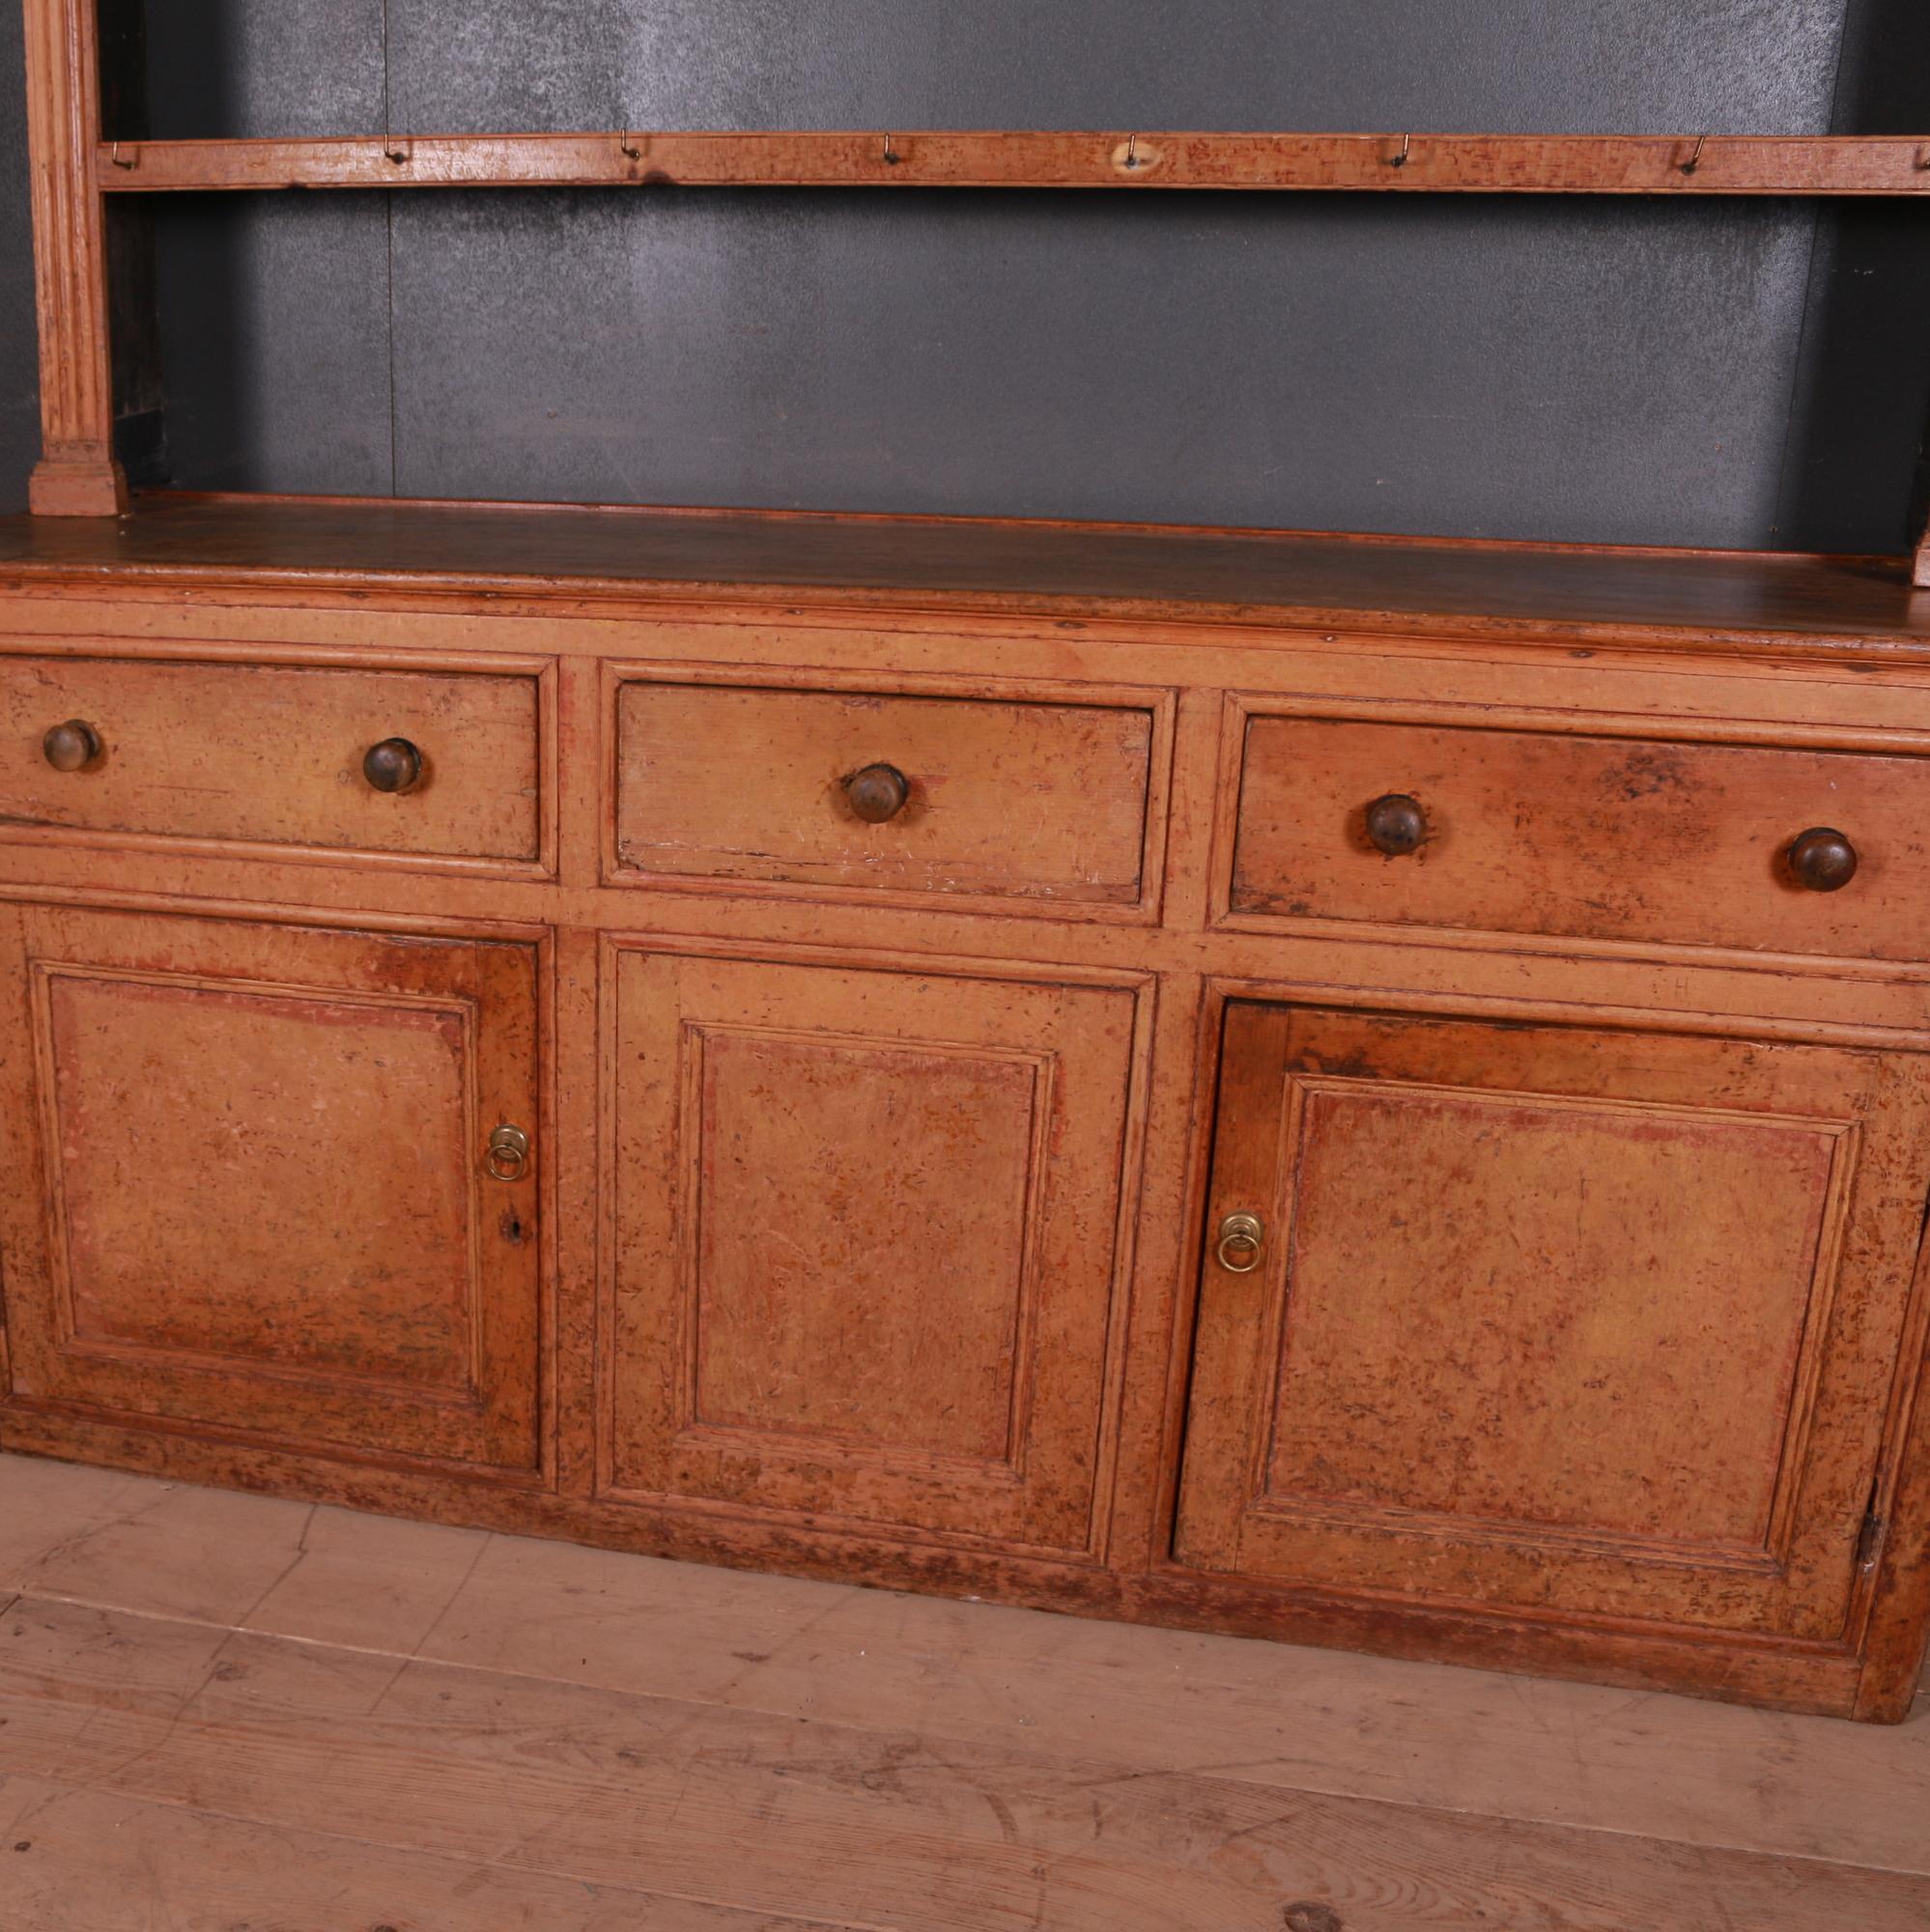 Very pretty early 19th century West Country dresser with original paint finish, 1810.

Dimensions:
69 inches (175 cms) wide
19 inches (48 cms) deep
76 inches (193 cms) high.